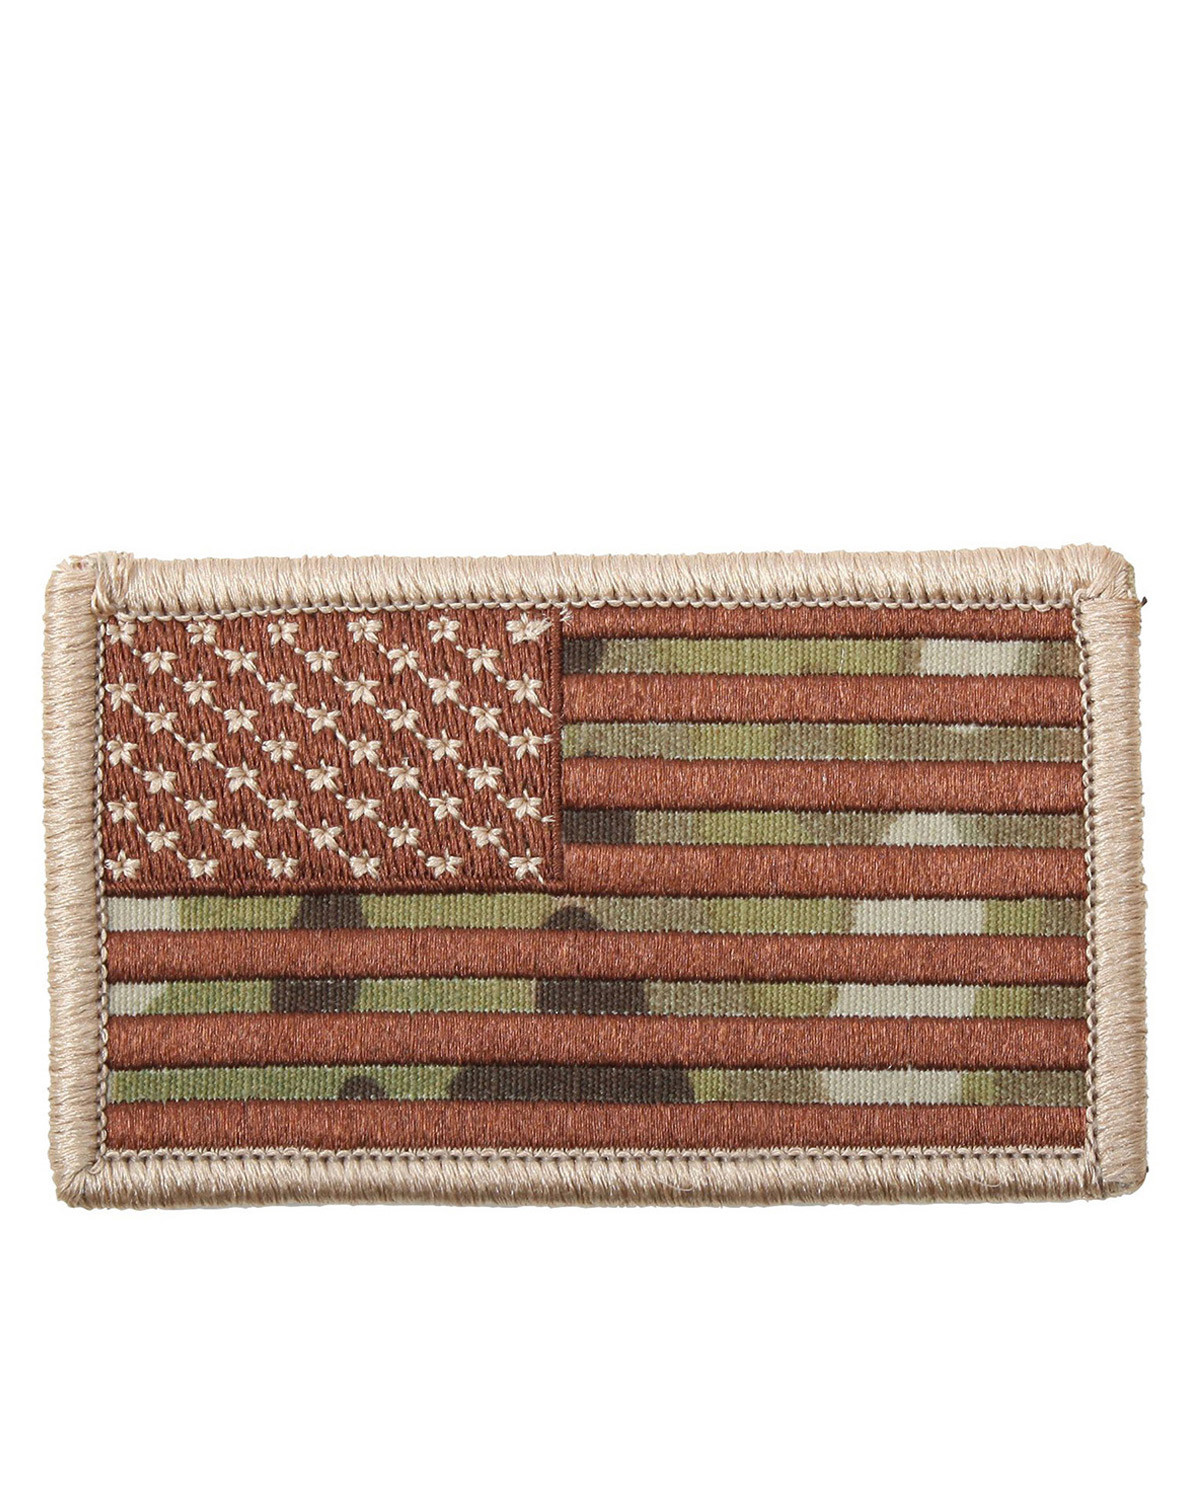 Rothco American Flag Patch (Multicam, One Size)